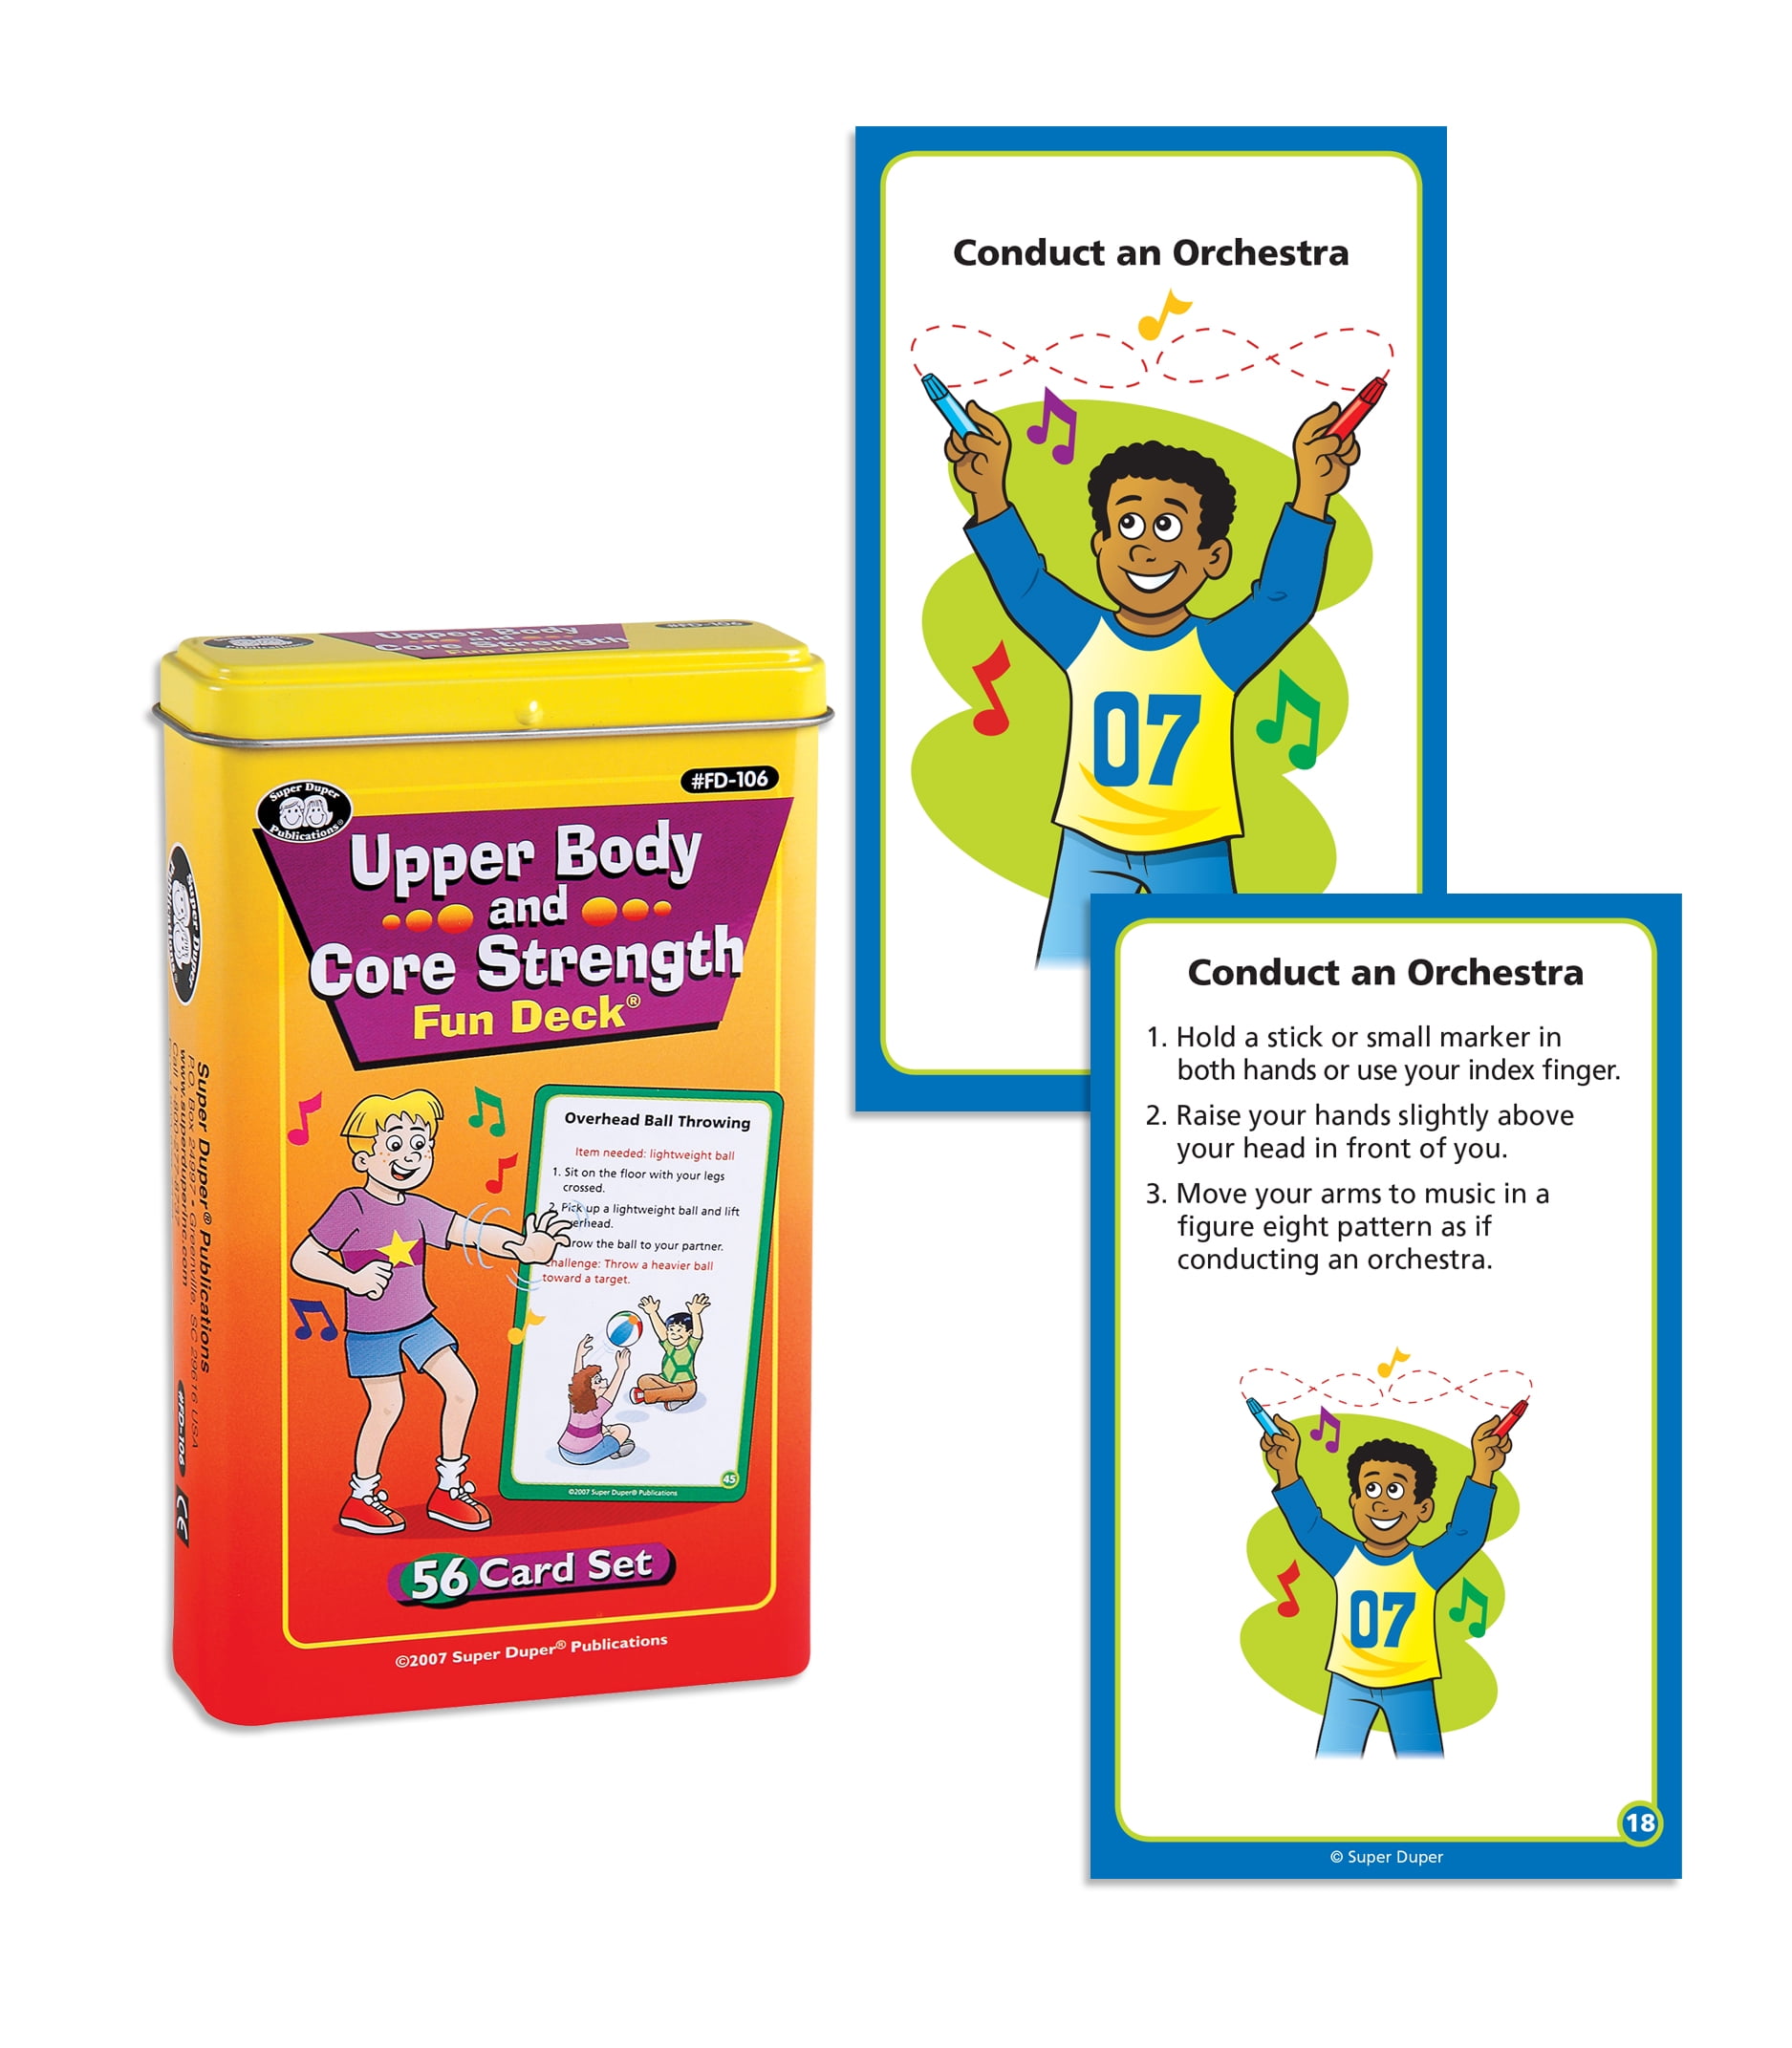 Super Duper Publications | Upper Body and Core Strength Fun Deck |  Occupational Therapy Flash Cards | Gross Motor Movement Activity |  Educational Learning Materials for Children 